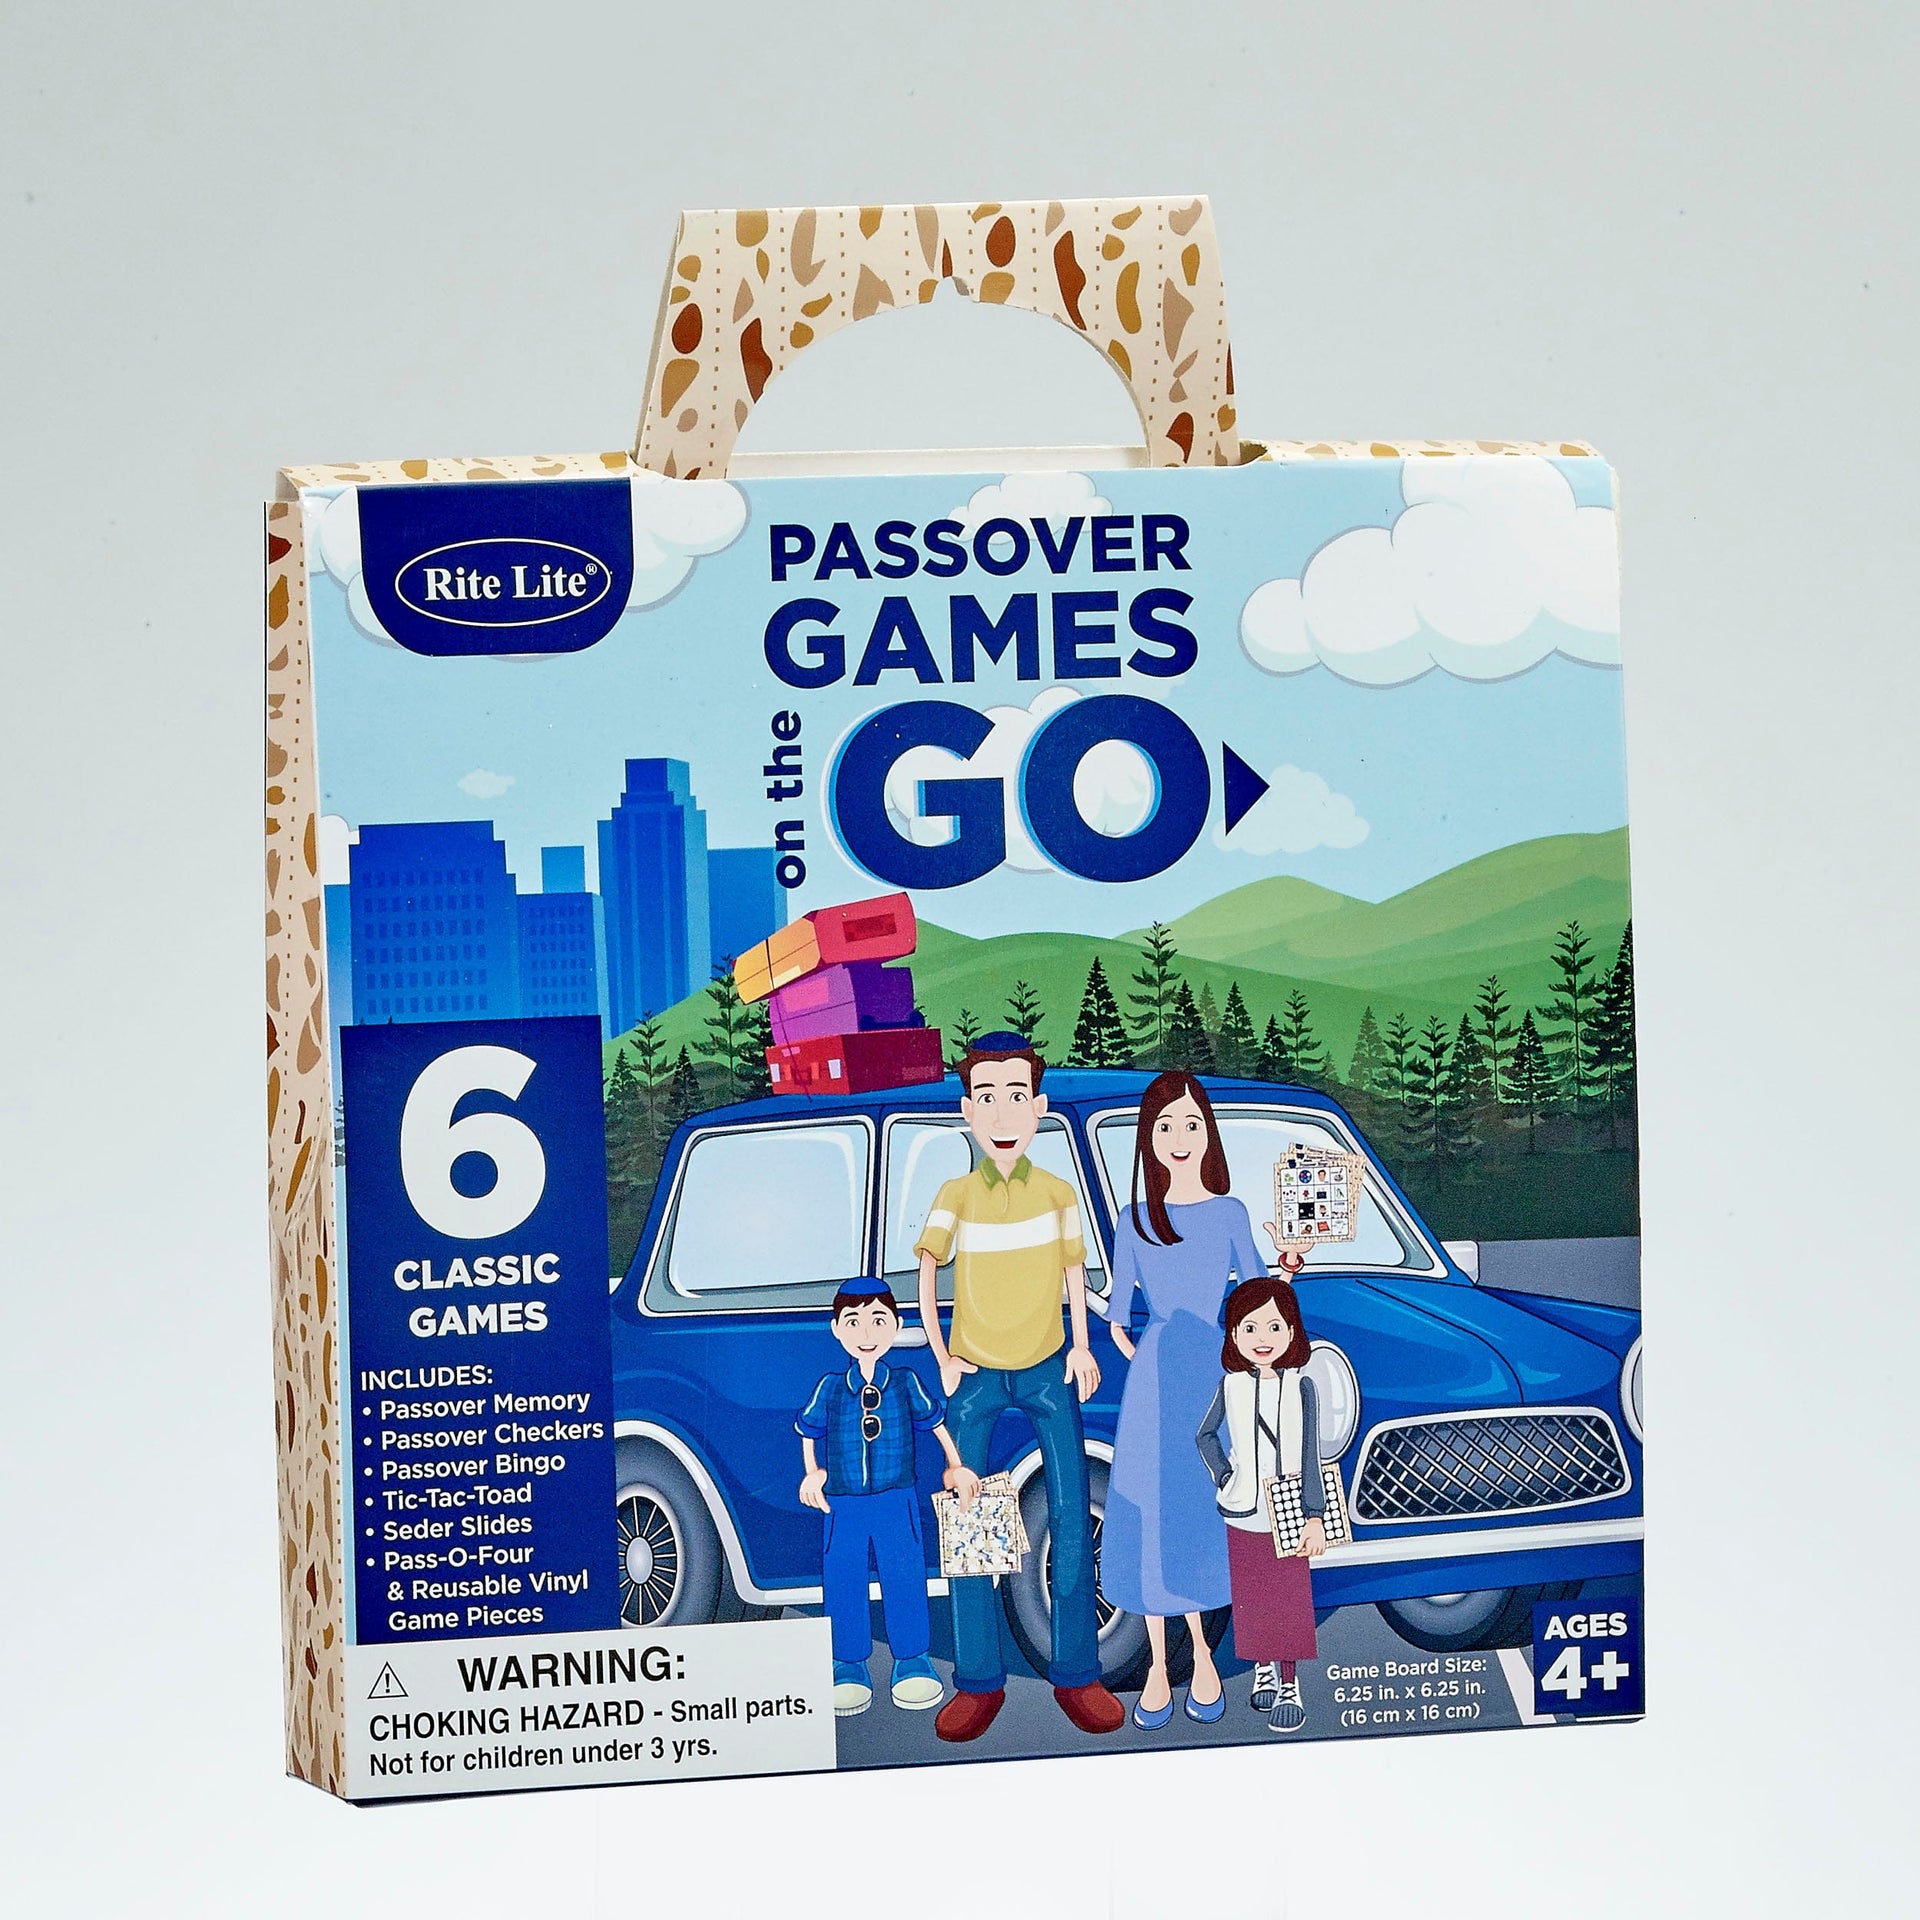 Rite Lite Games Passover Games On The Go - 6 Classic Games